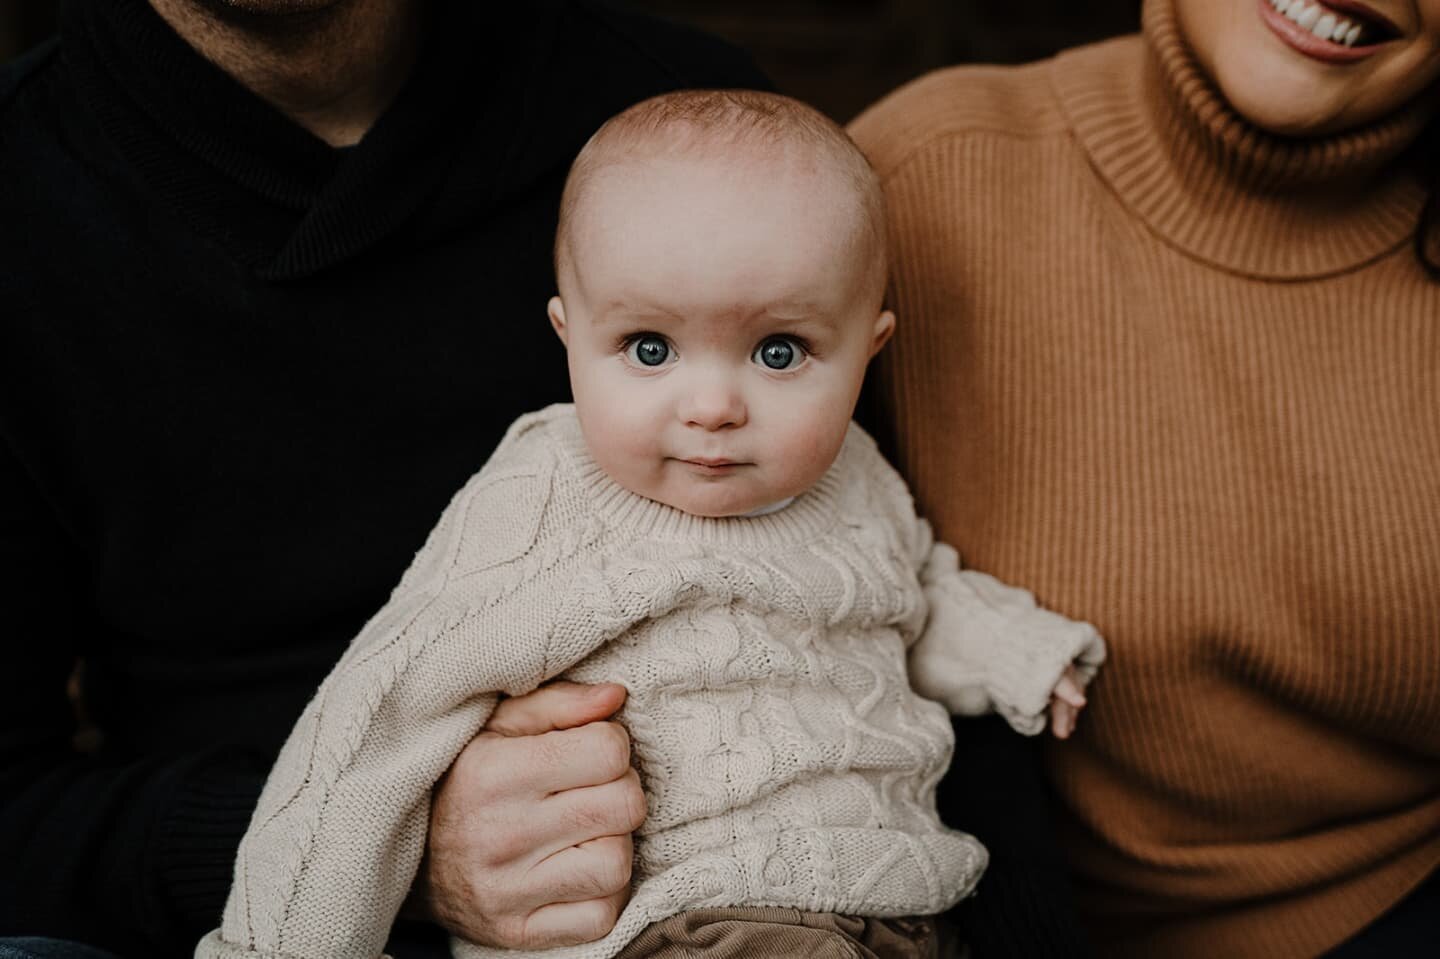 I got it from my mama
.
Rowan and his incredible blue eyes 😍
.
It was so lovely to meet this wee dude and his family yesterday, 7 months of absolute gorgeousness and such a sweet little guy!
.
#7monthsold #family #belfastbabyphotographer #belfastfam